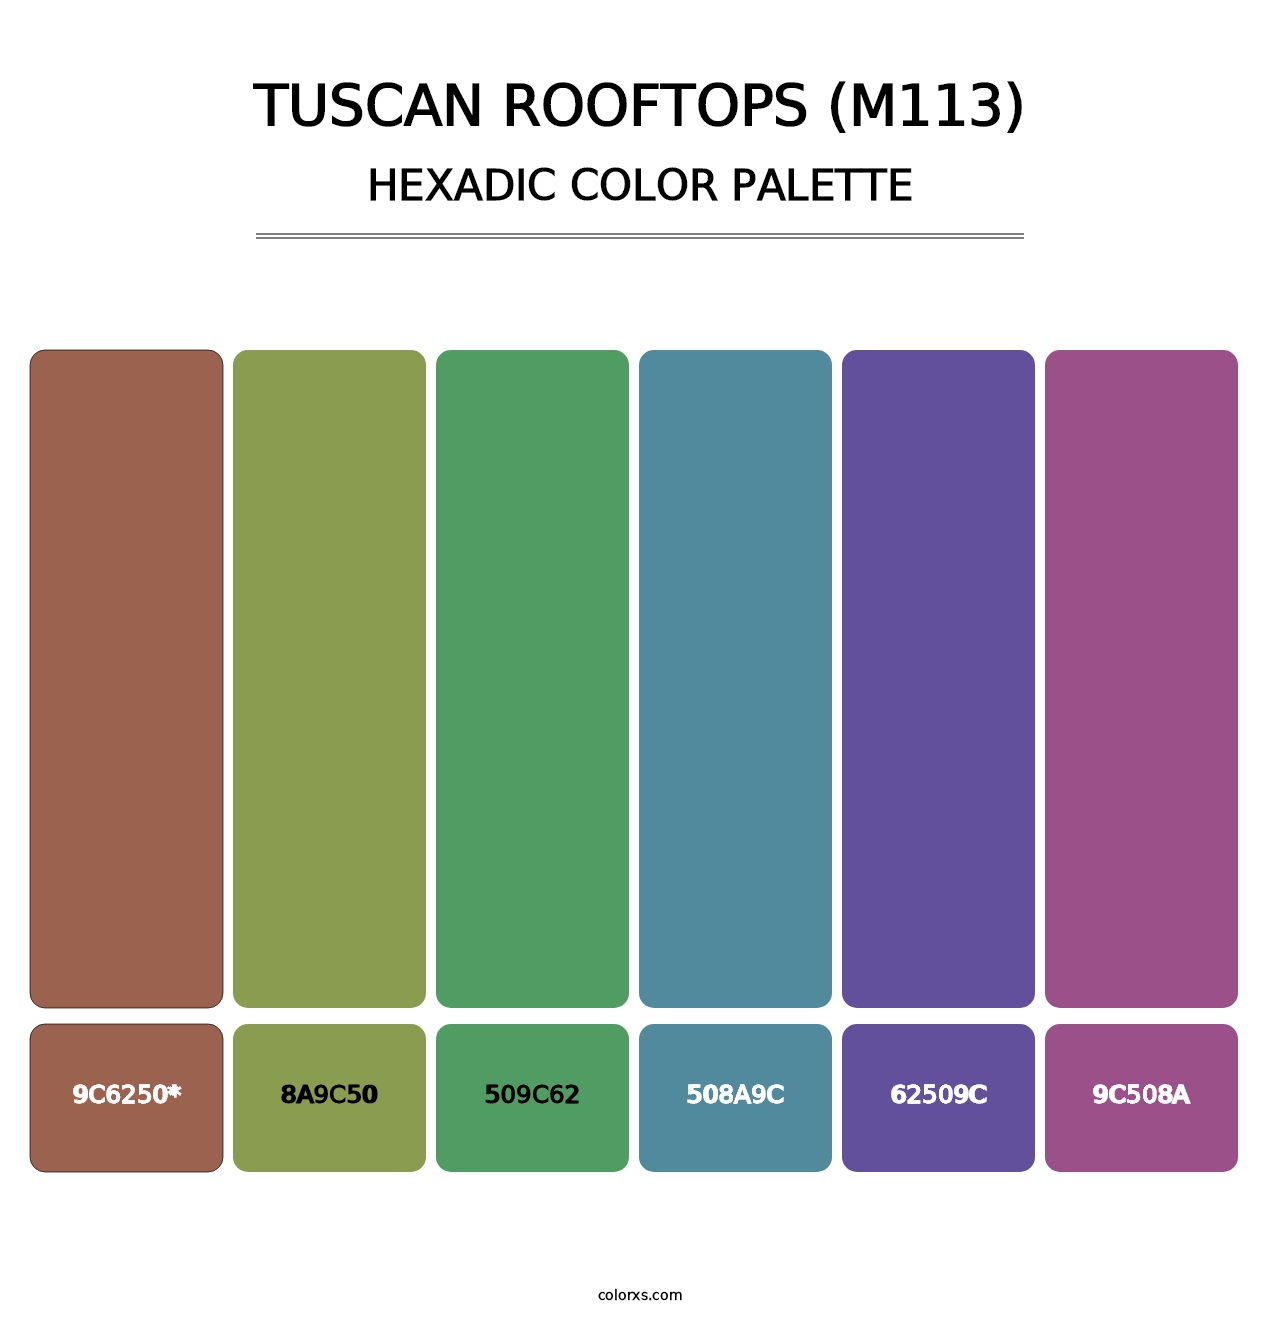 Tuscan Rooftops (M113) - Hexadic Color Palette